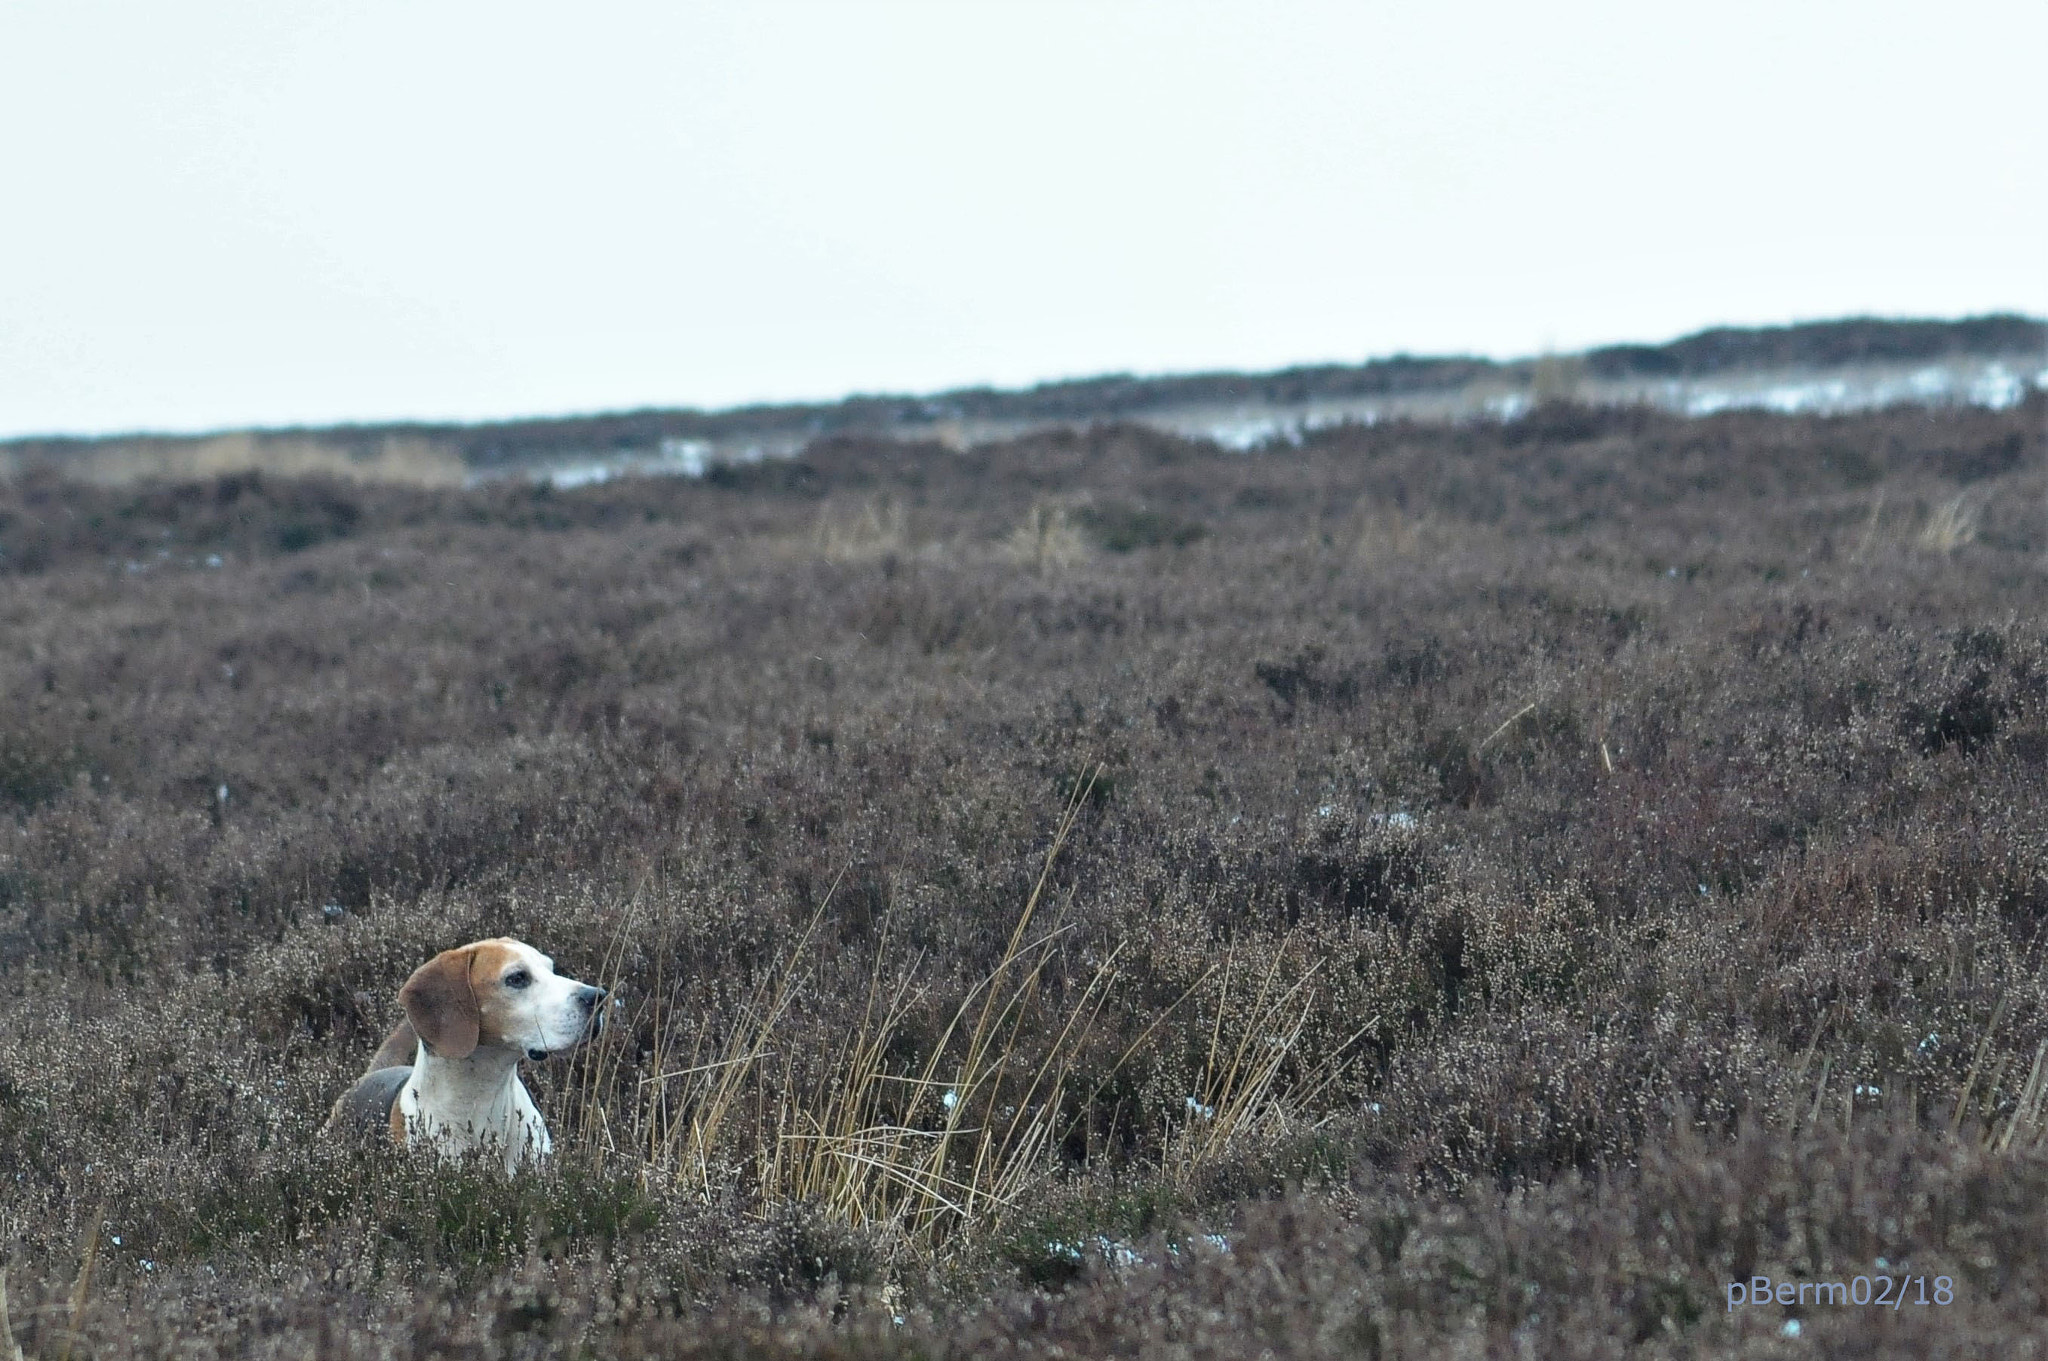 AF Zoom-Nikkor 70-300mm f/4-5.6D ED sample photo. Bamford edge with the beagles photography